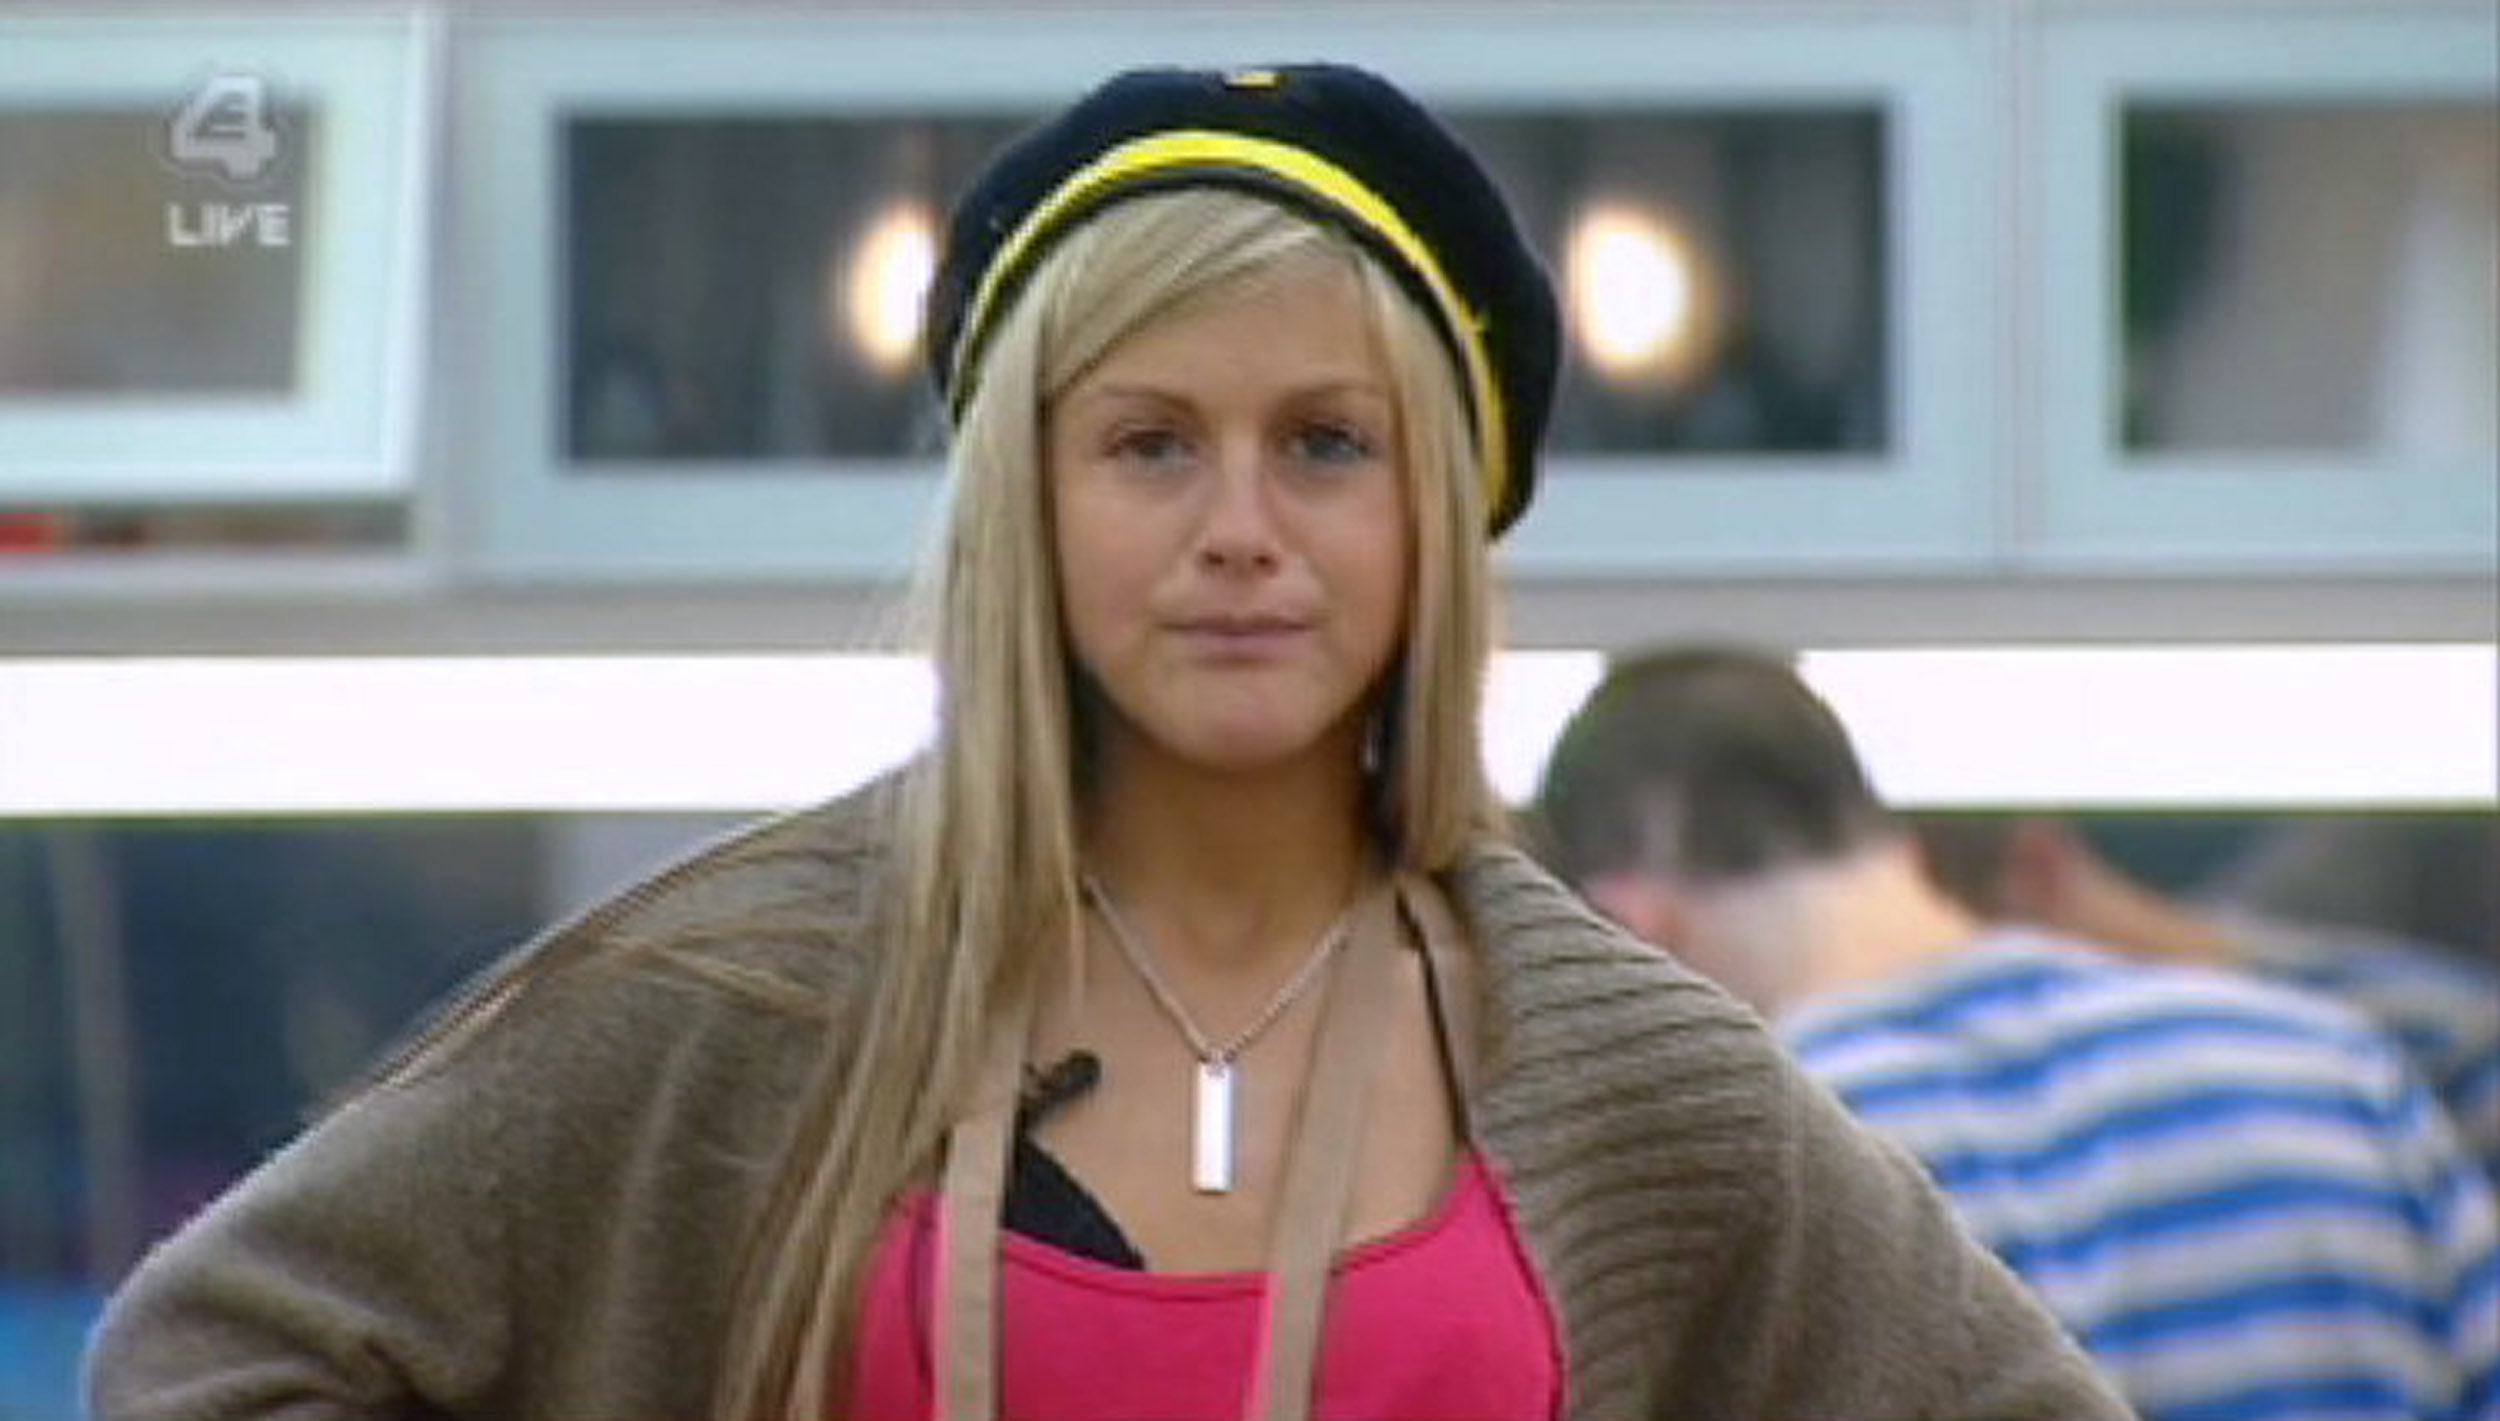 Nikki Grahame spent 157 days in Big Brother overall, more than any other contestant